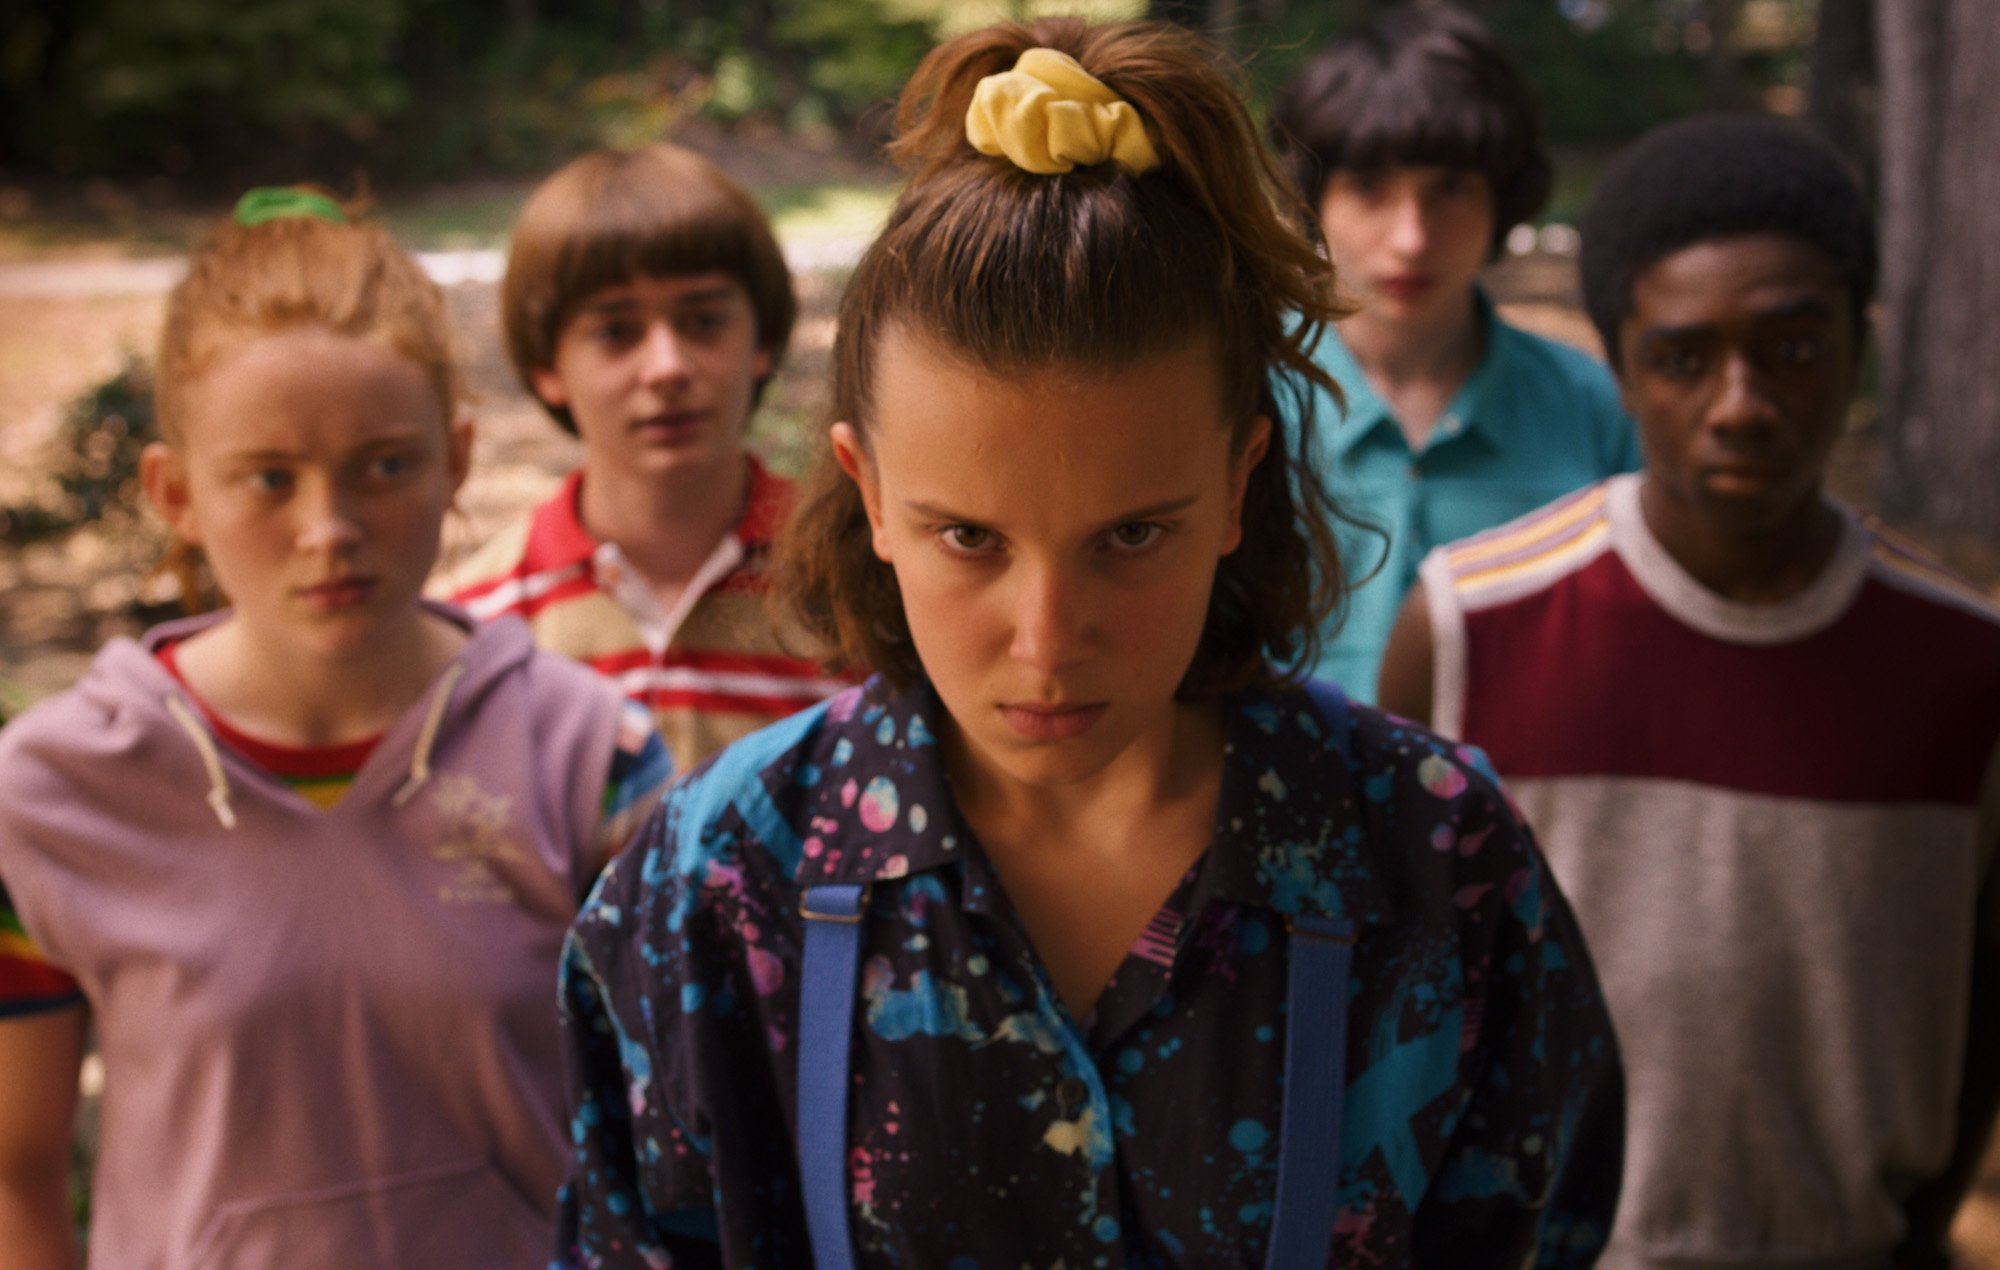 'Stranger Things' season 4: trailers, cast, release date and fan theories